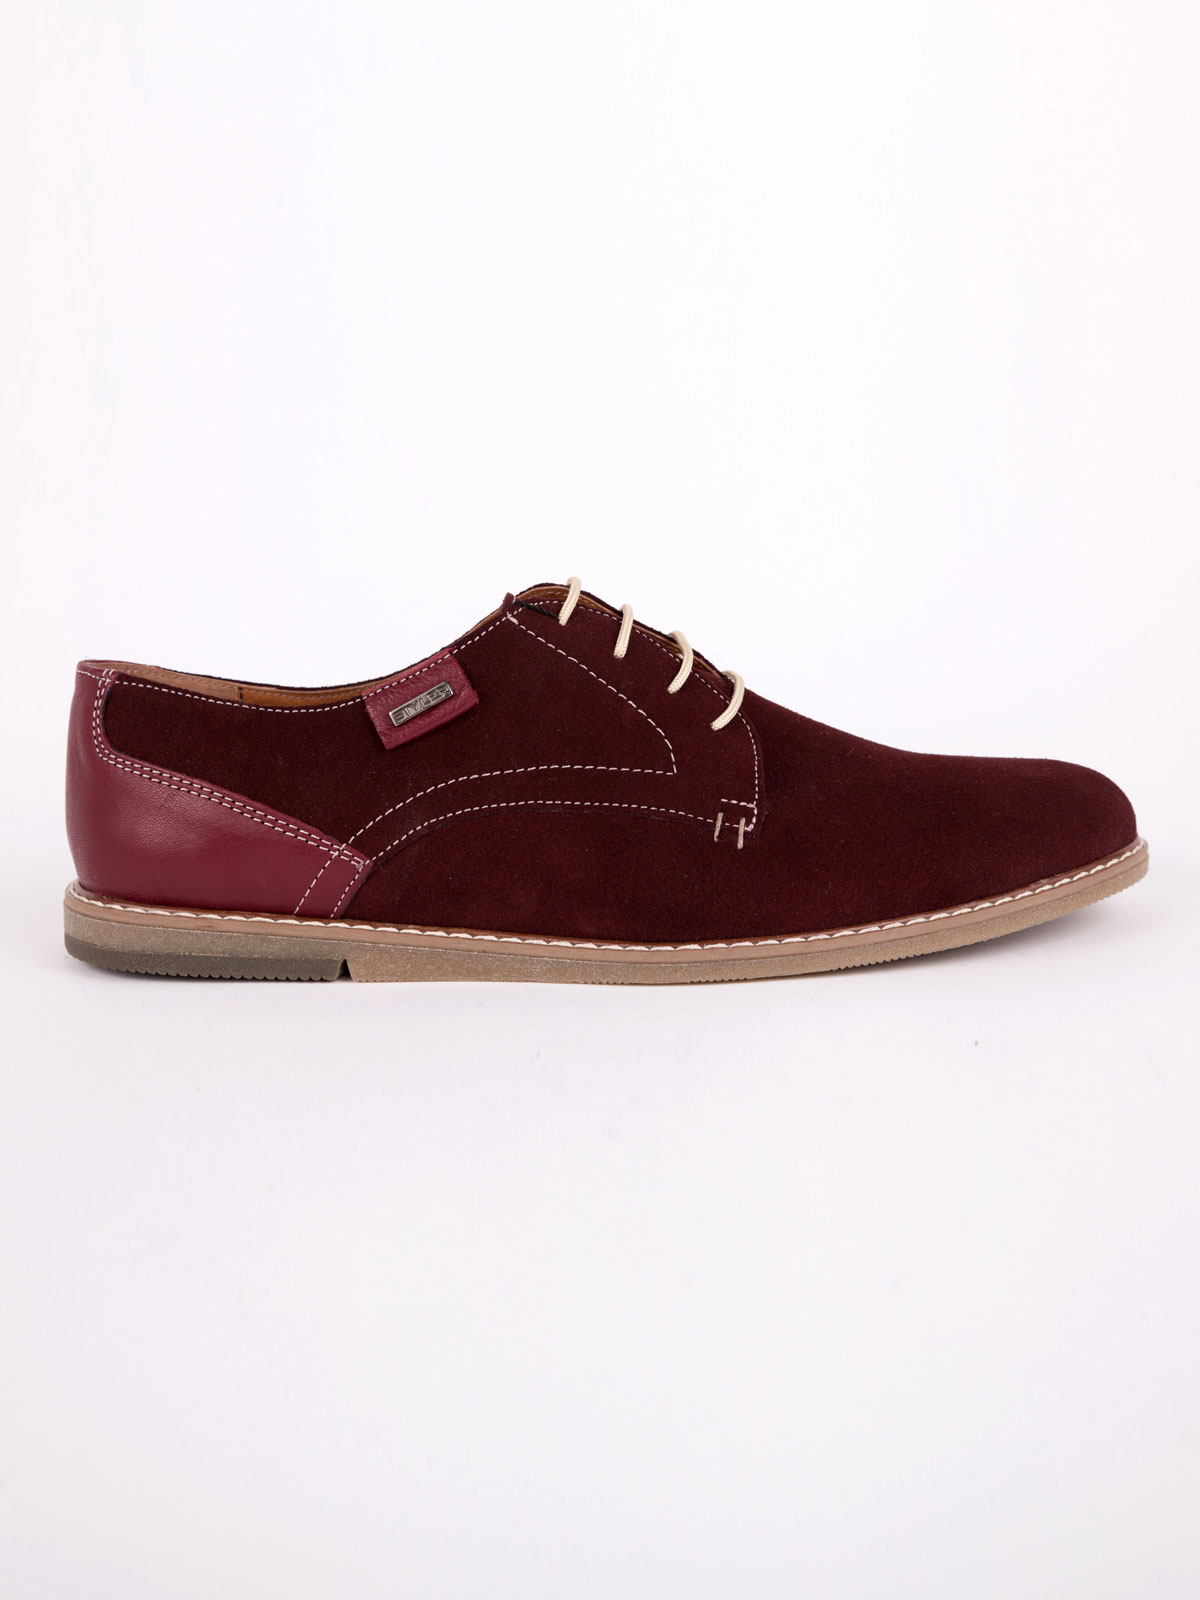 Suede shoes with laces - 81076 - € 50.06 img4